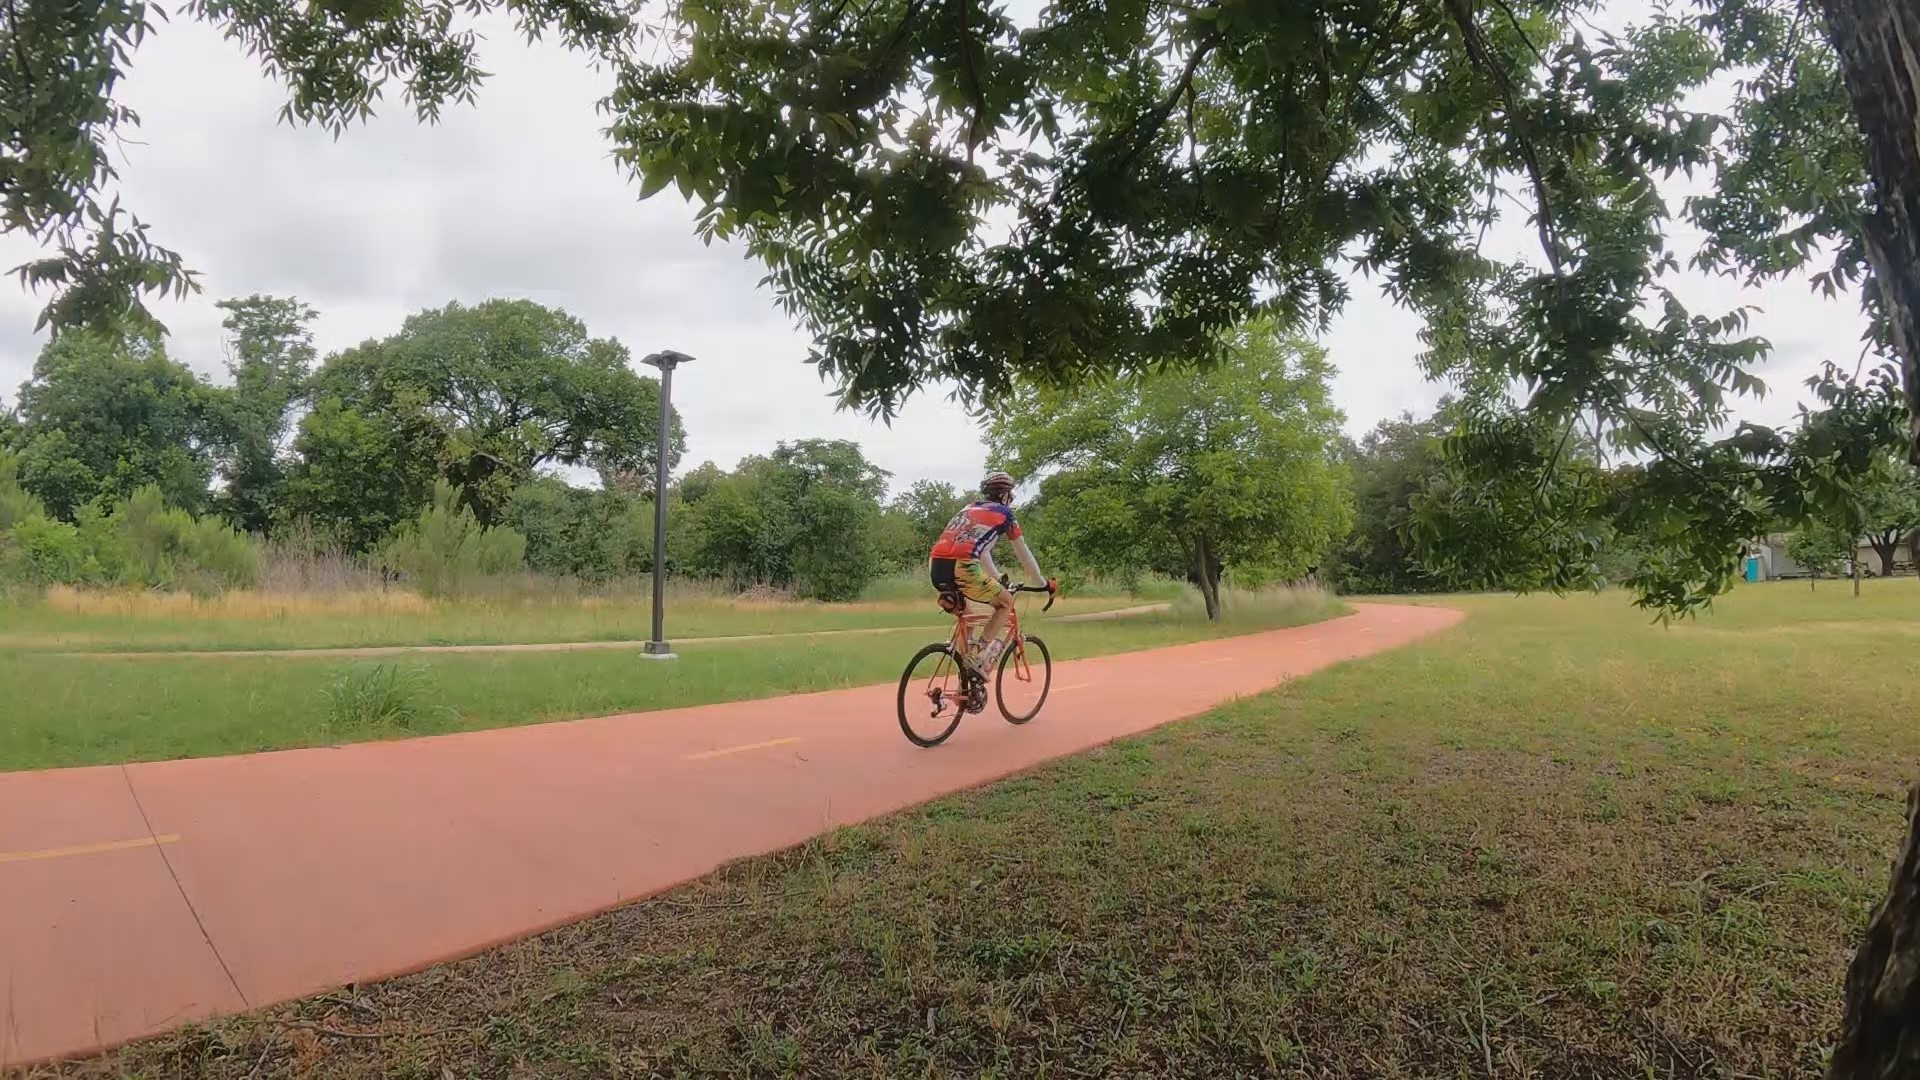 While it's been there unofficially for years, over the last 5-6 years, the Austin Parks Foundation has worked with the City and others to create a finished trail.